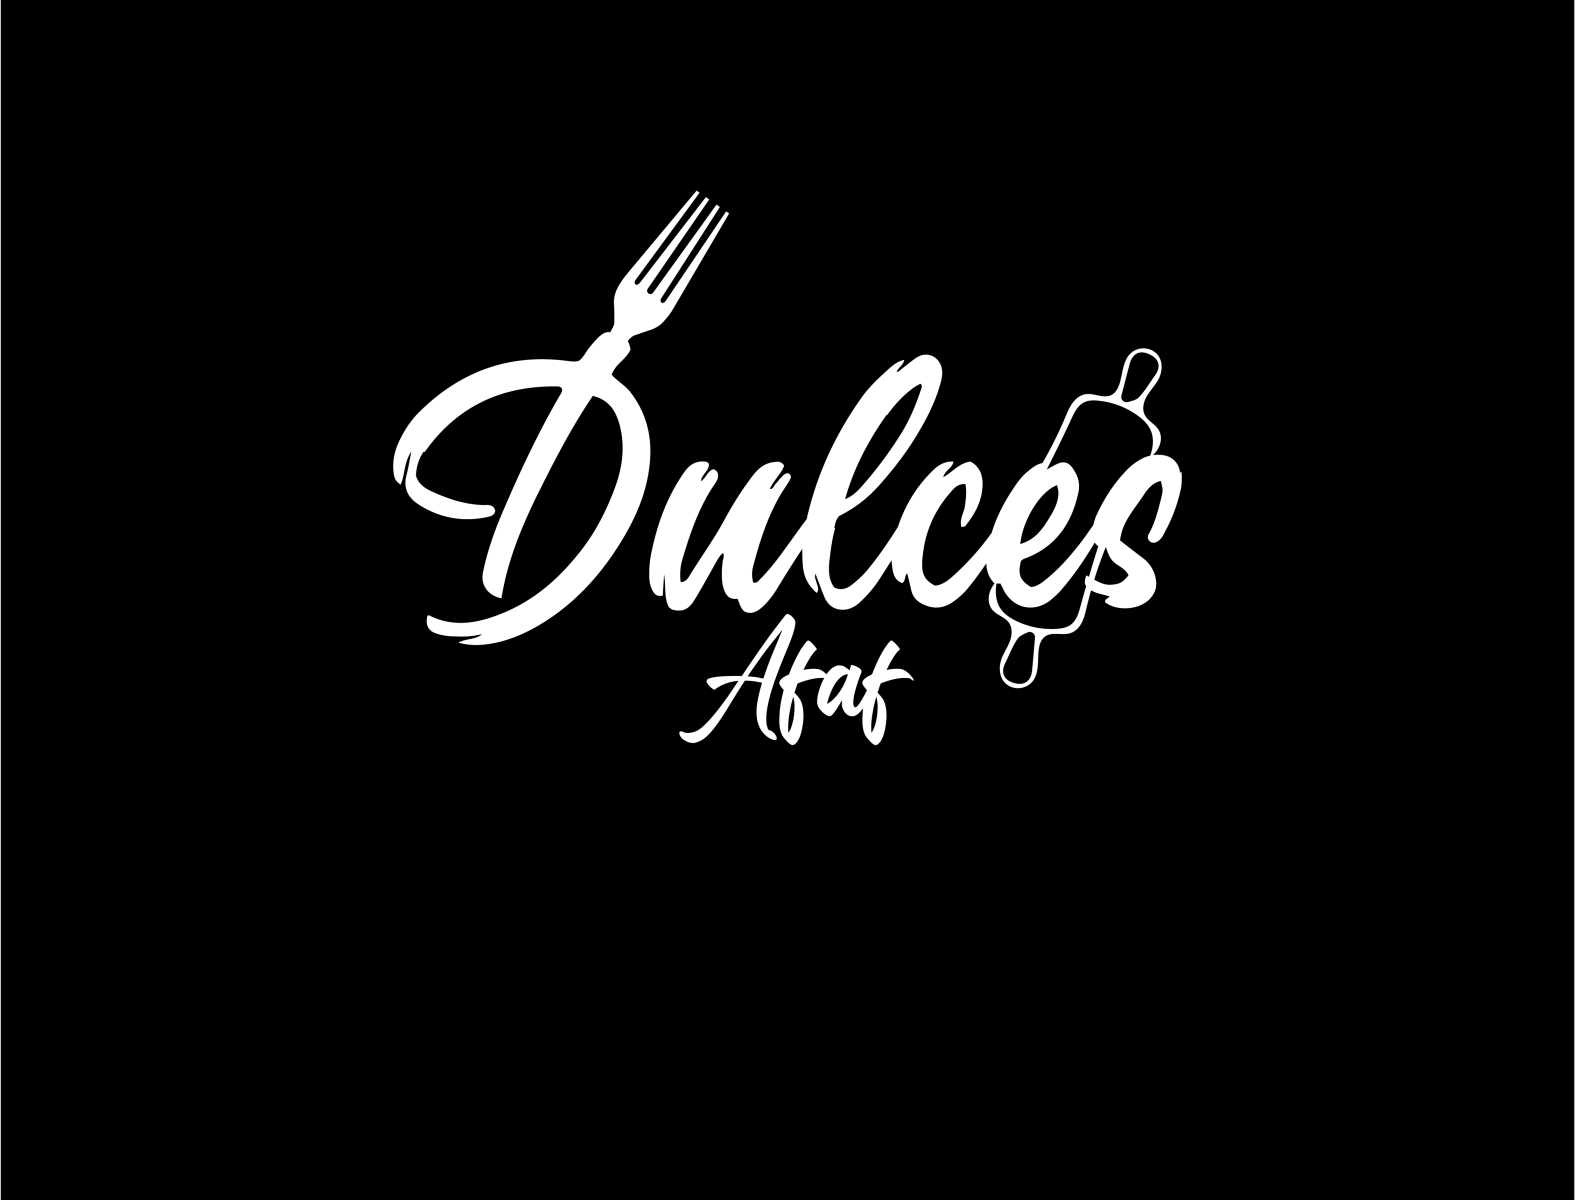 DULCES AFAF - CAKES MAKER by Adam Kabid on Dribbble